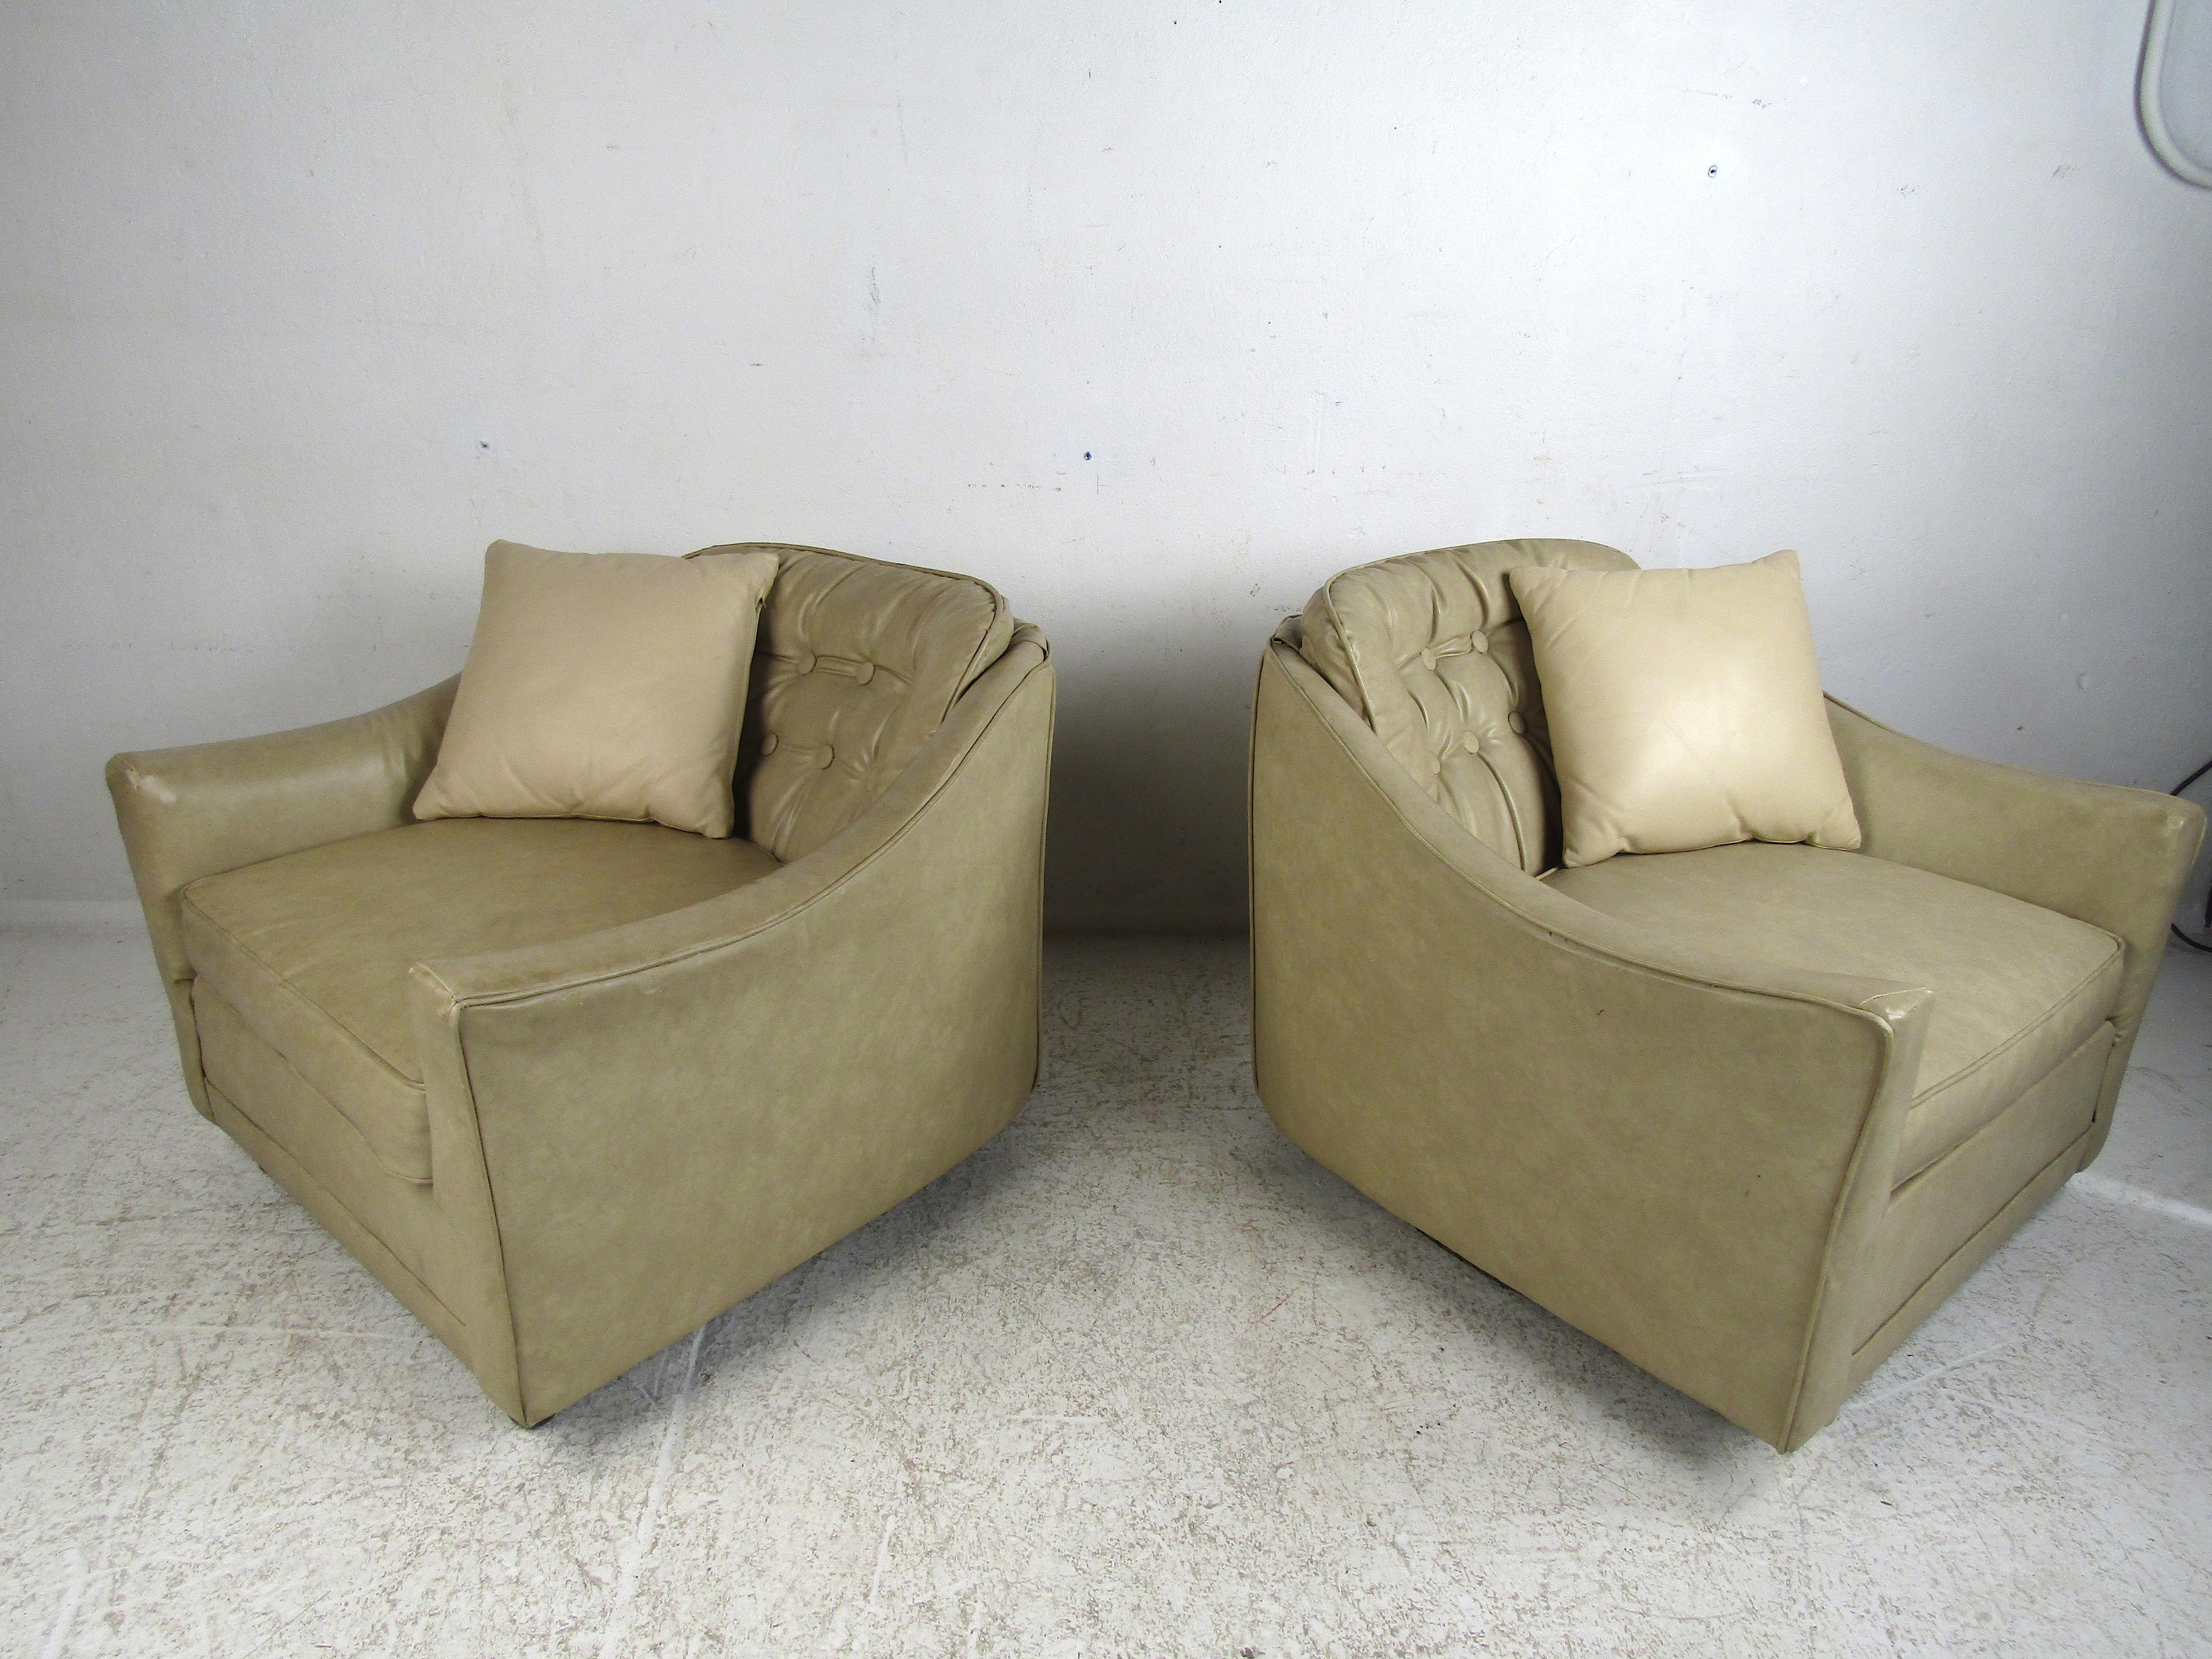 Pair of Mid-Century Modern club chairs by Selig covered in leather upholstery. Tufted backrests with sloped armrests give these chairs a great look. This pair would make a great addition to any modern interior. Please confirm item location with